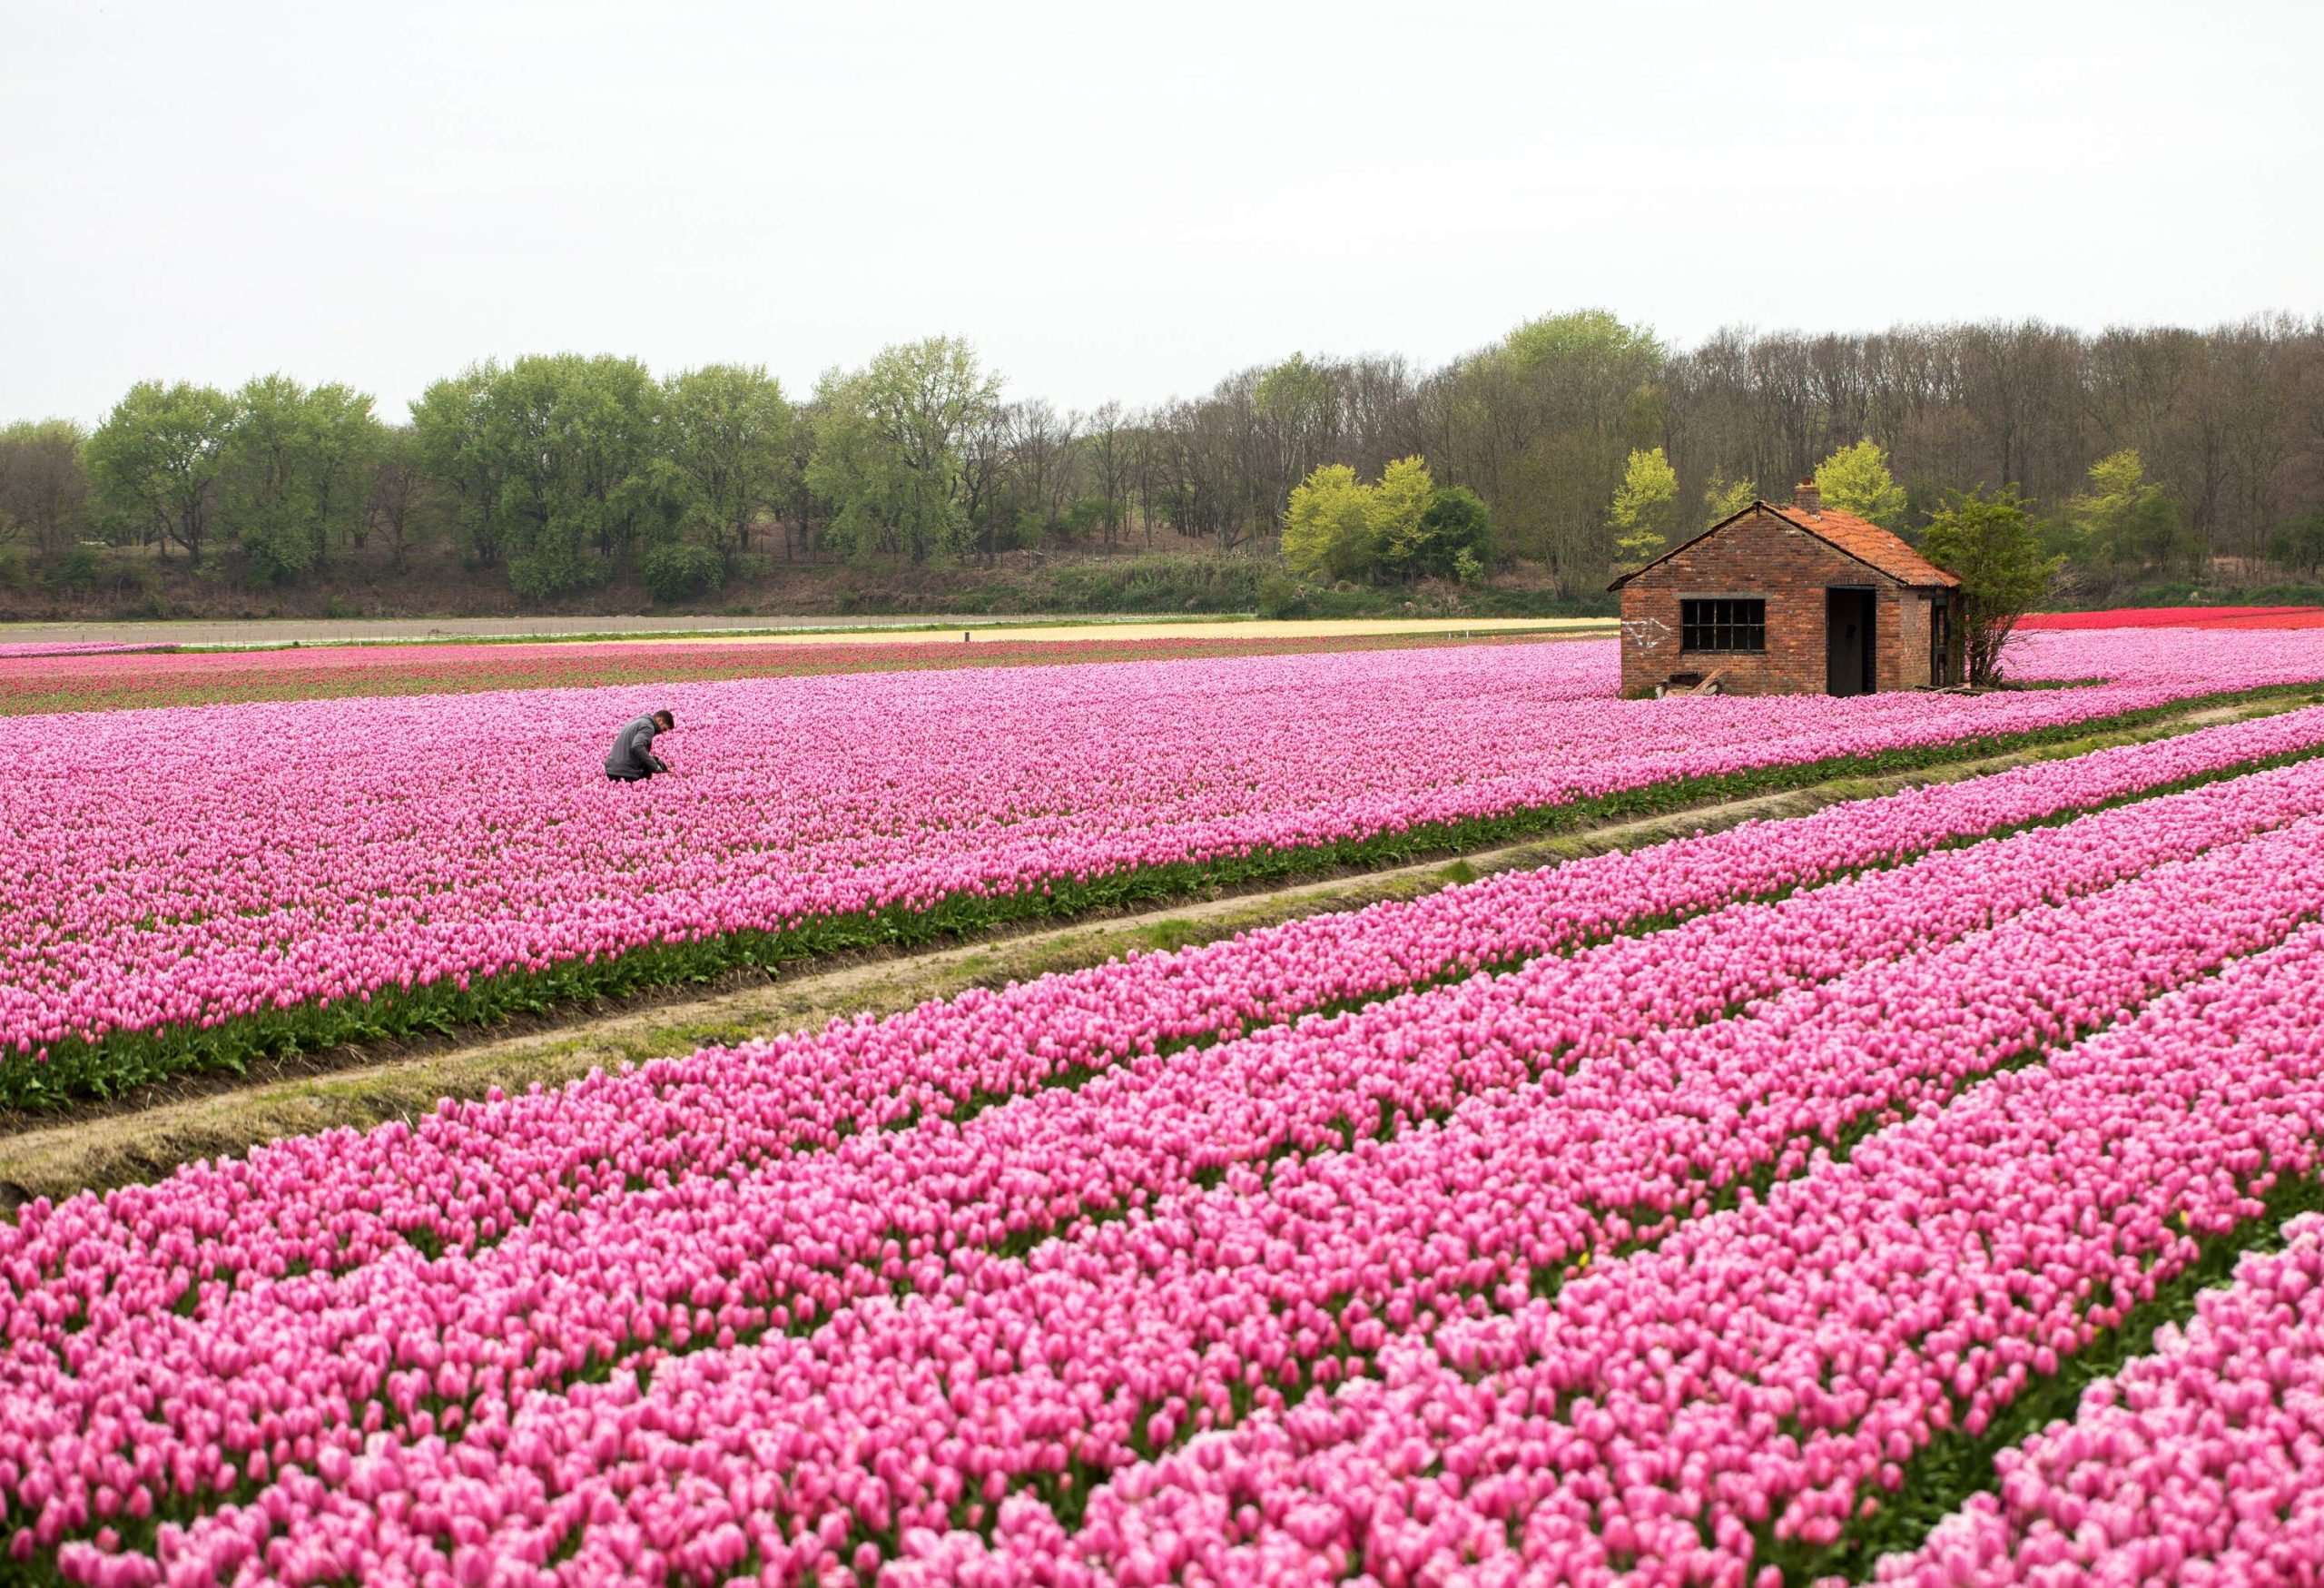 A man works on a lush pink tulip field near an abandoned brick hut enclosed by trees.